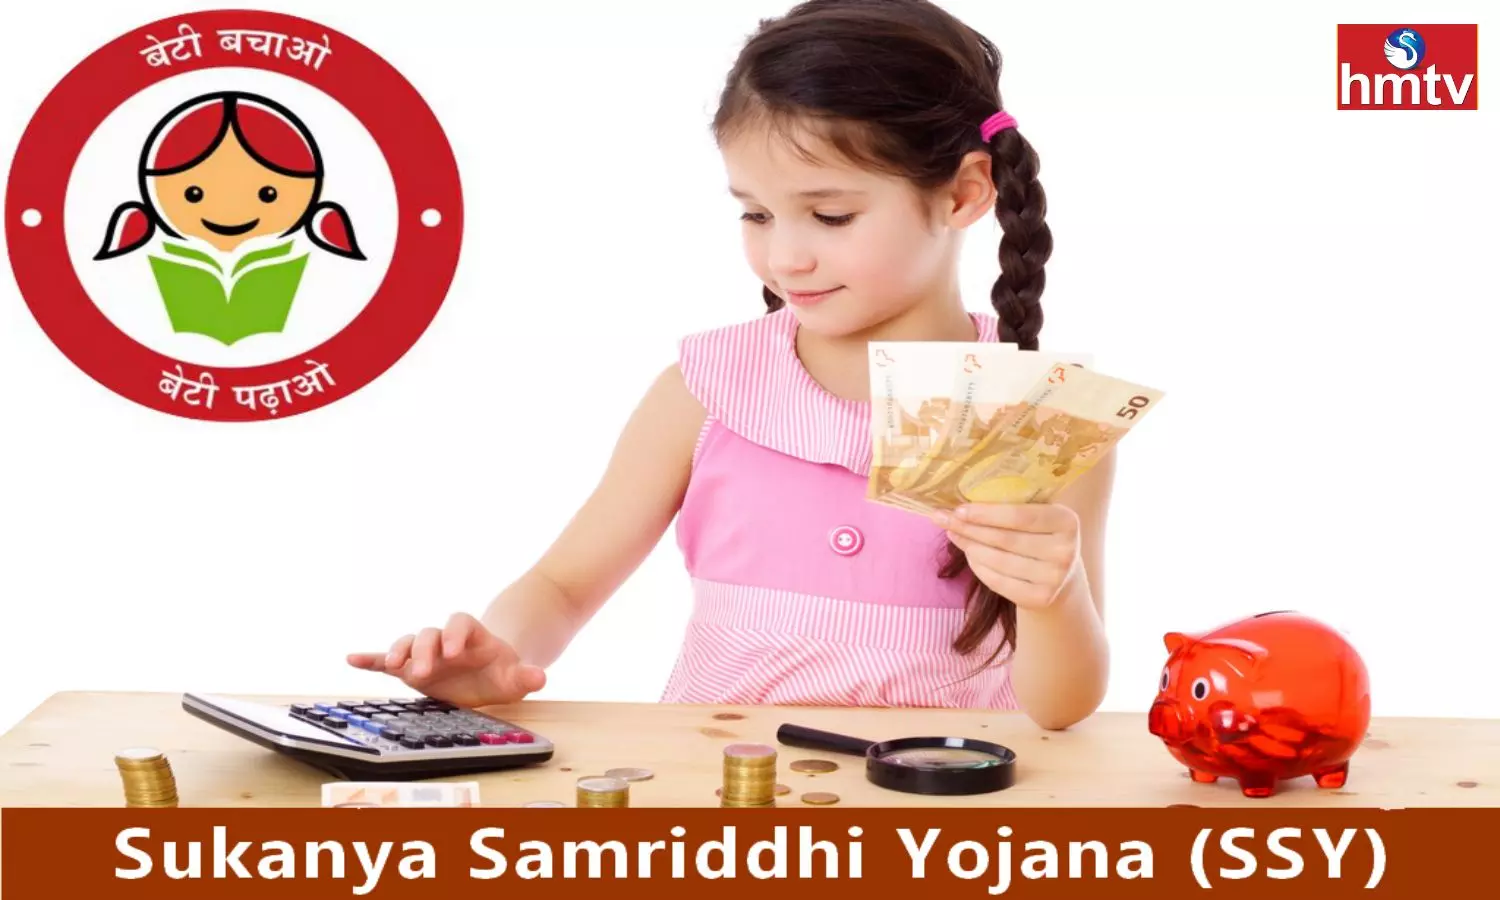 Are You Saving In The Sukanya Samriddhi Yojana Scheme If You Forget This The Account Will Be Closed